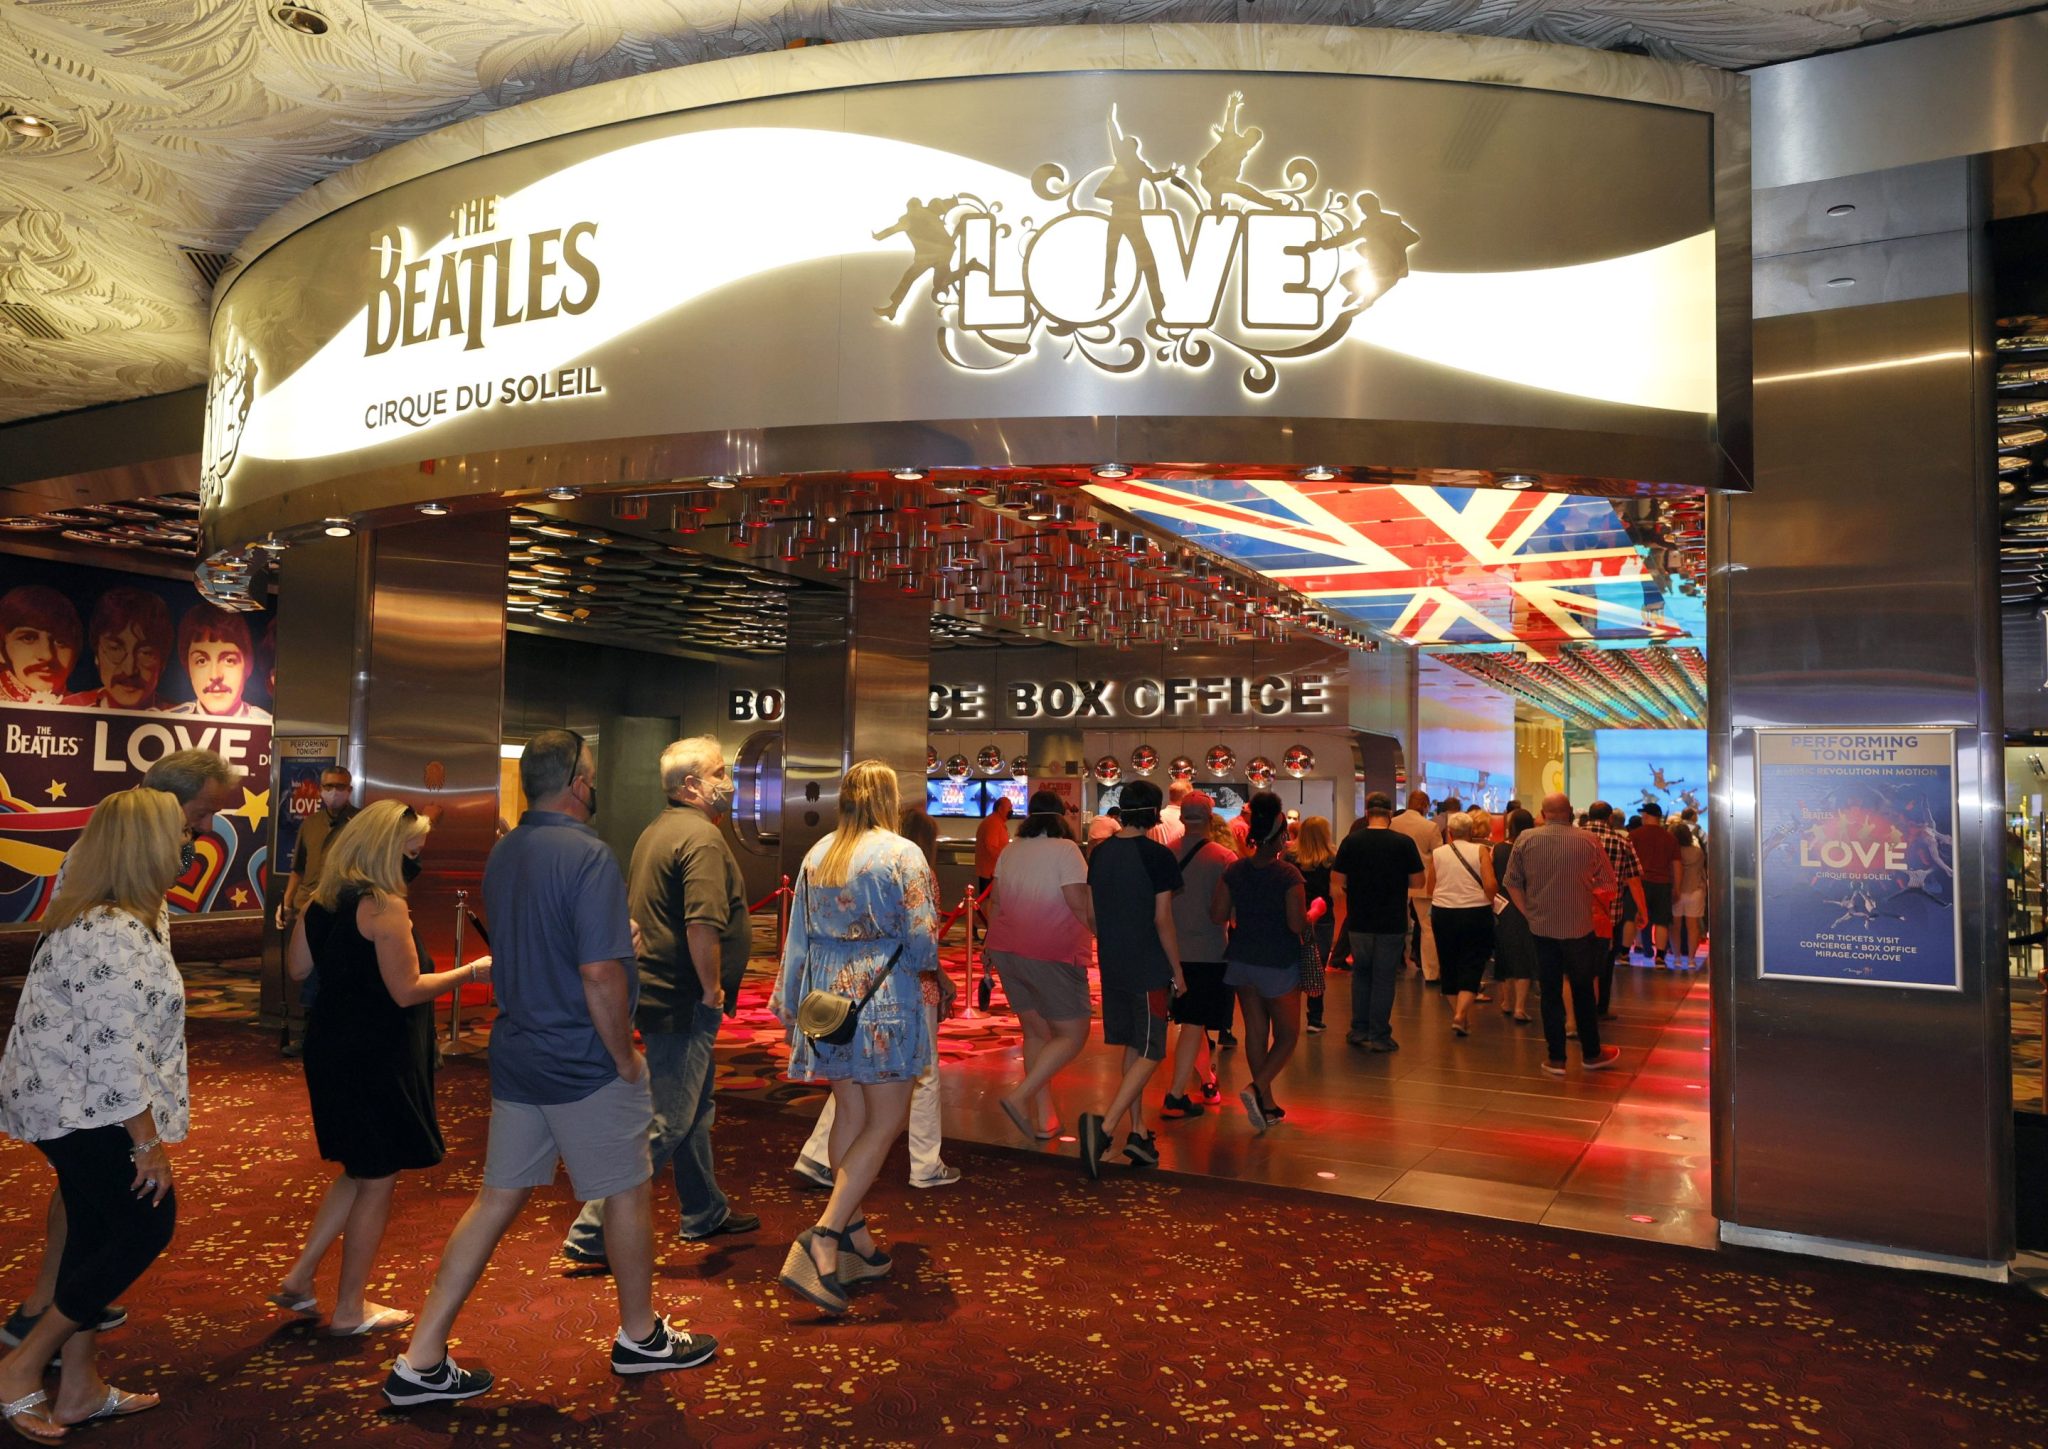 ‘this wasn’t our decision’: cirque du soleil forced by hard rock las vegas to close ‘the beatles love’ after 18 years